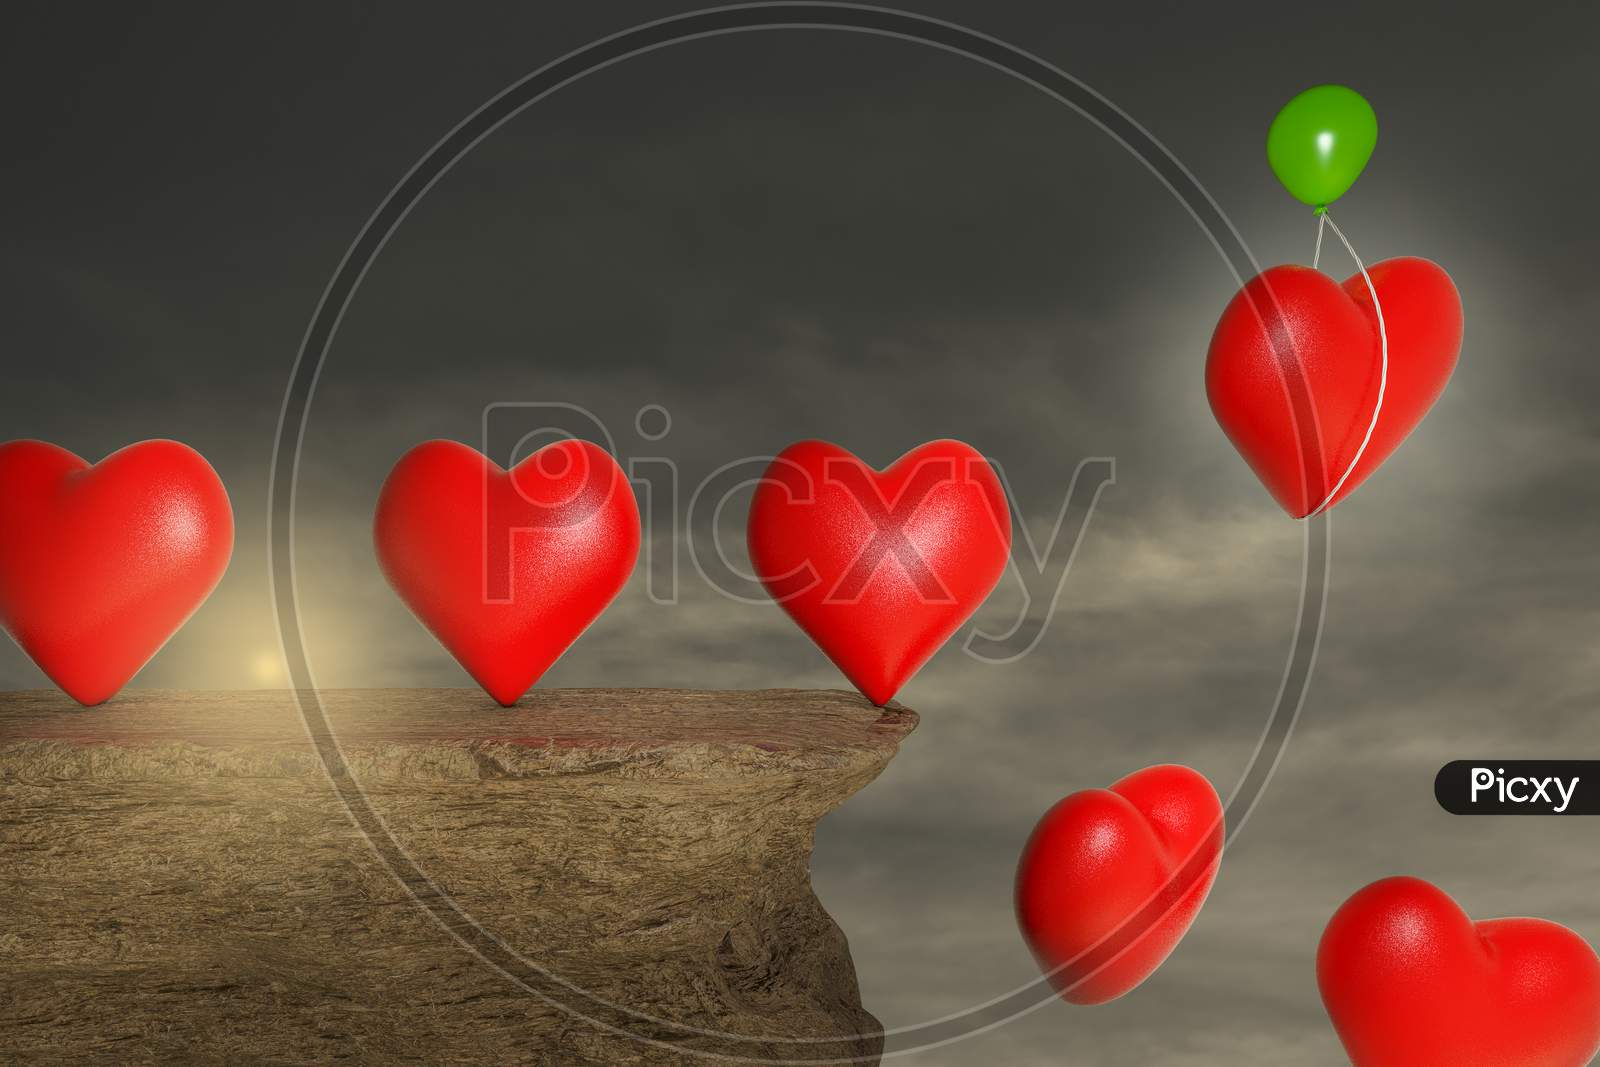 Red Heart On A Stone Cliff With A Green Balloon Help To Escape One Red Heart From Falling In A Sunset Day. Healthcare Medical Or First Aid Or Need For Change In Health Care Concept . 3D Illustration